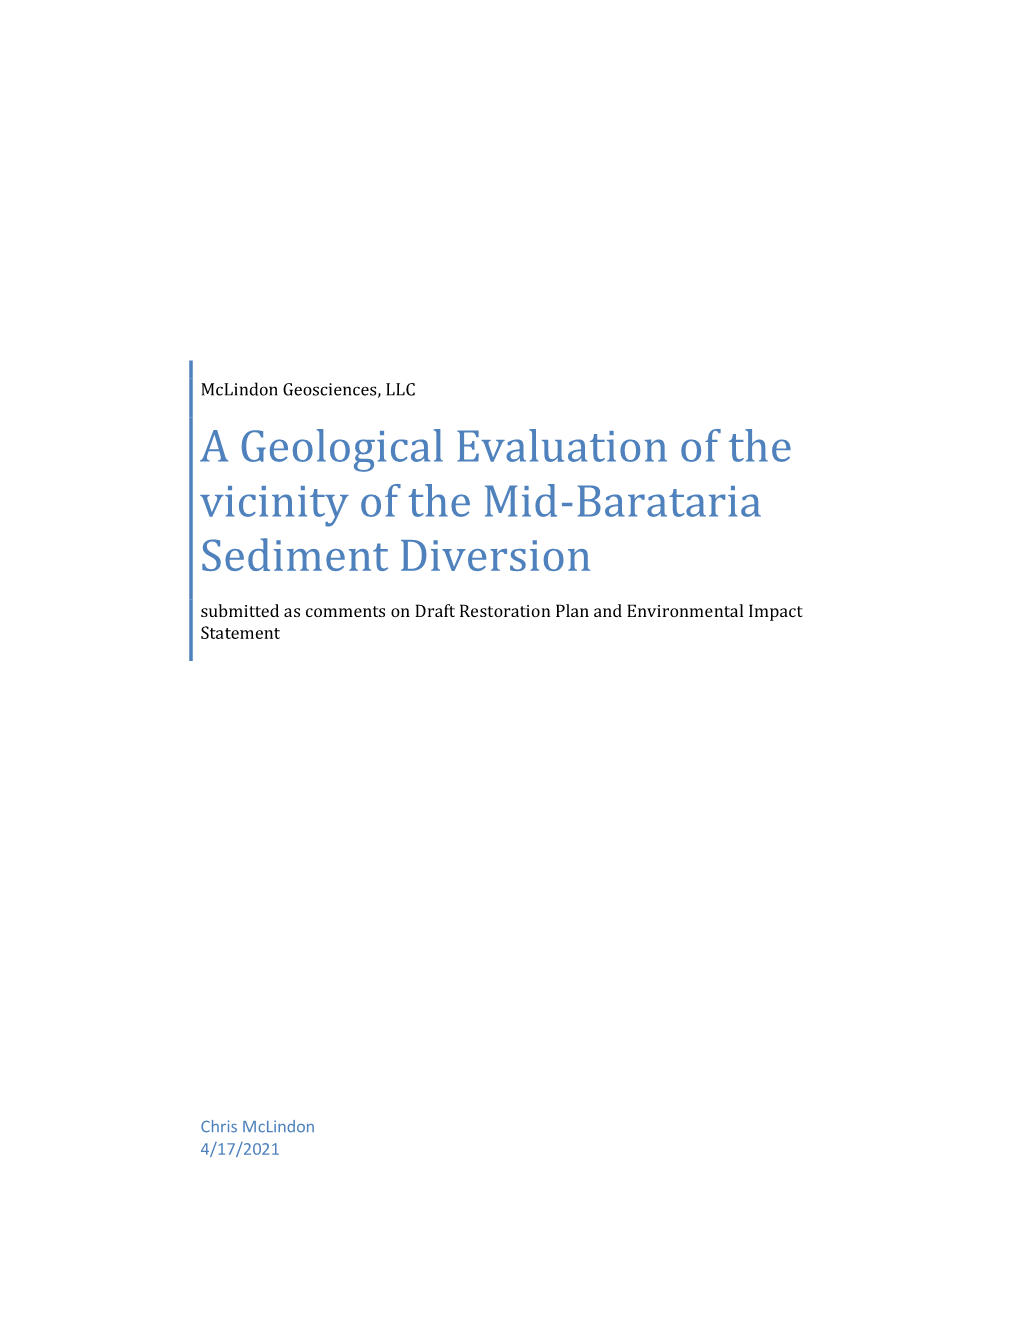 A Geological Evaluation of the Vicinity of the Mid-Barataria Sediment Diversion Submitted As Comments on Draft Restoration Plan and Environmental Impact Statement